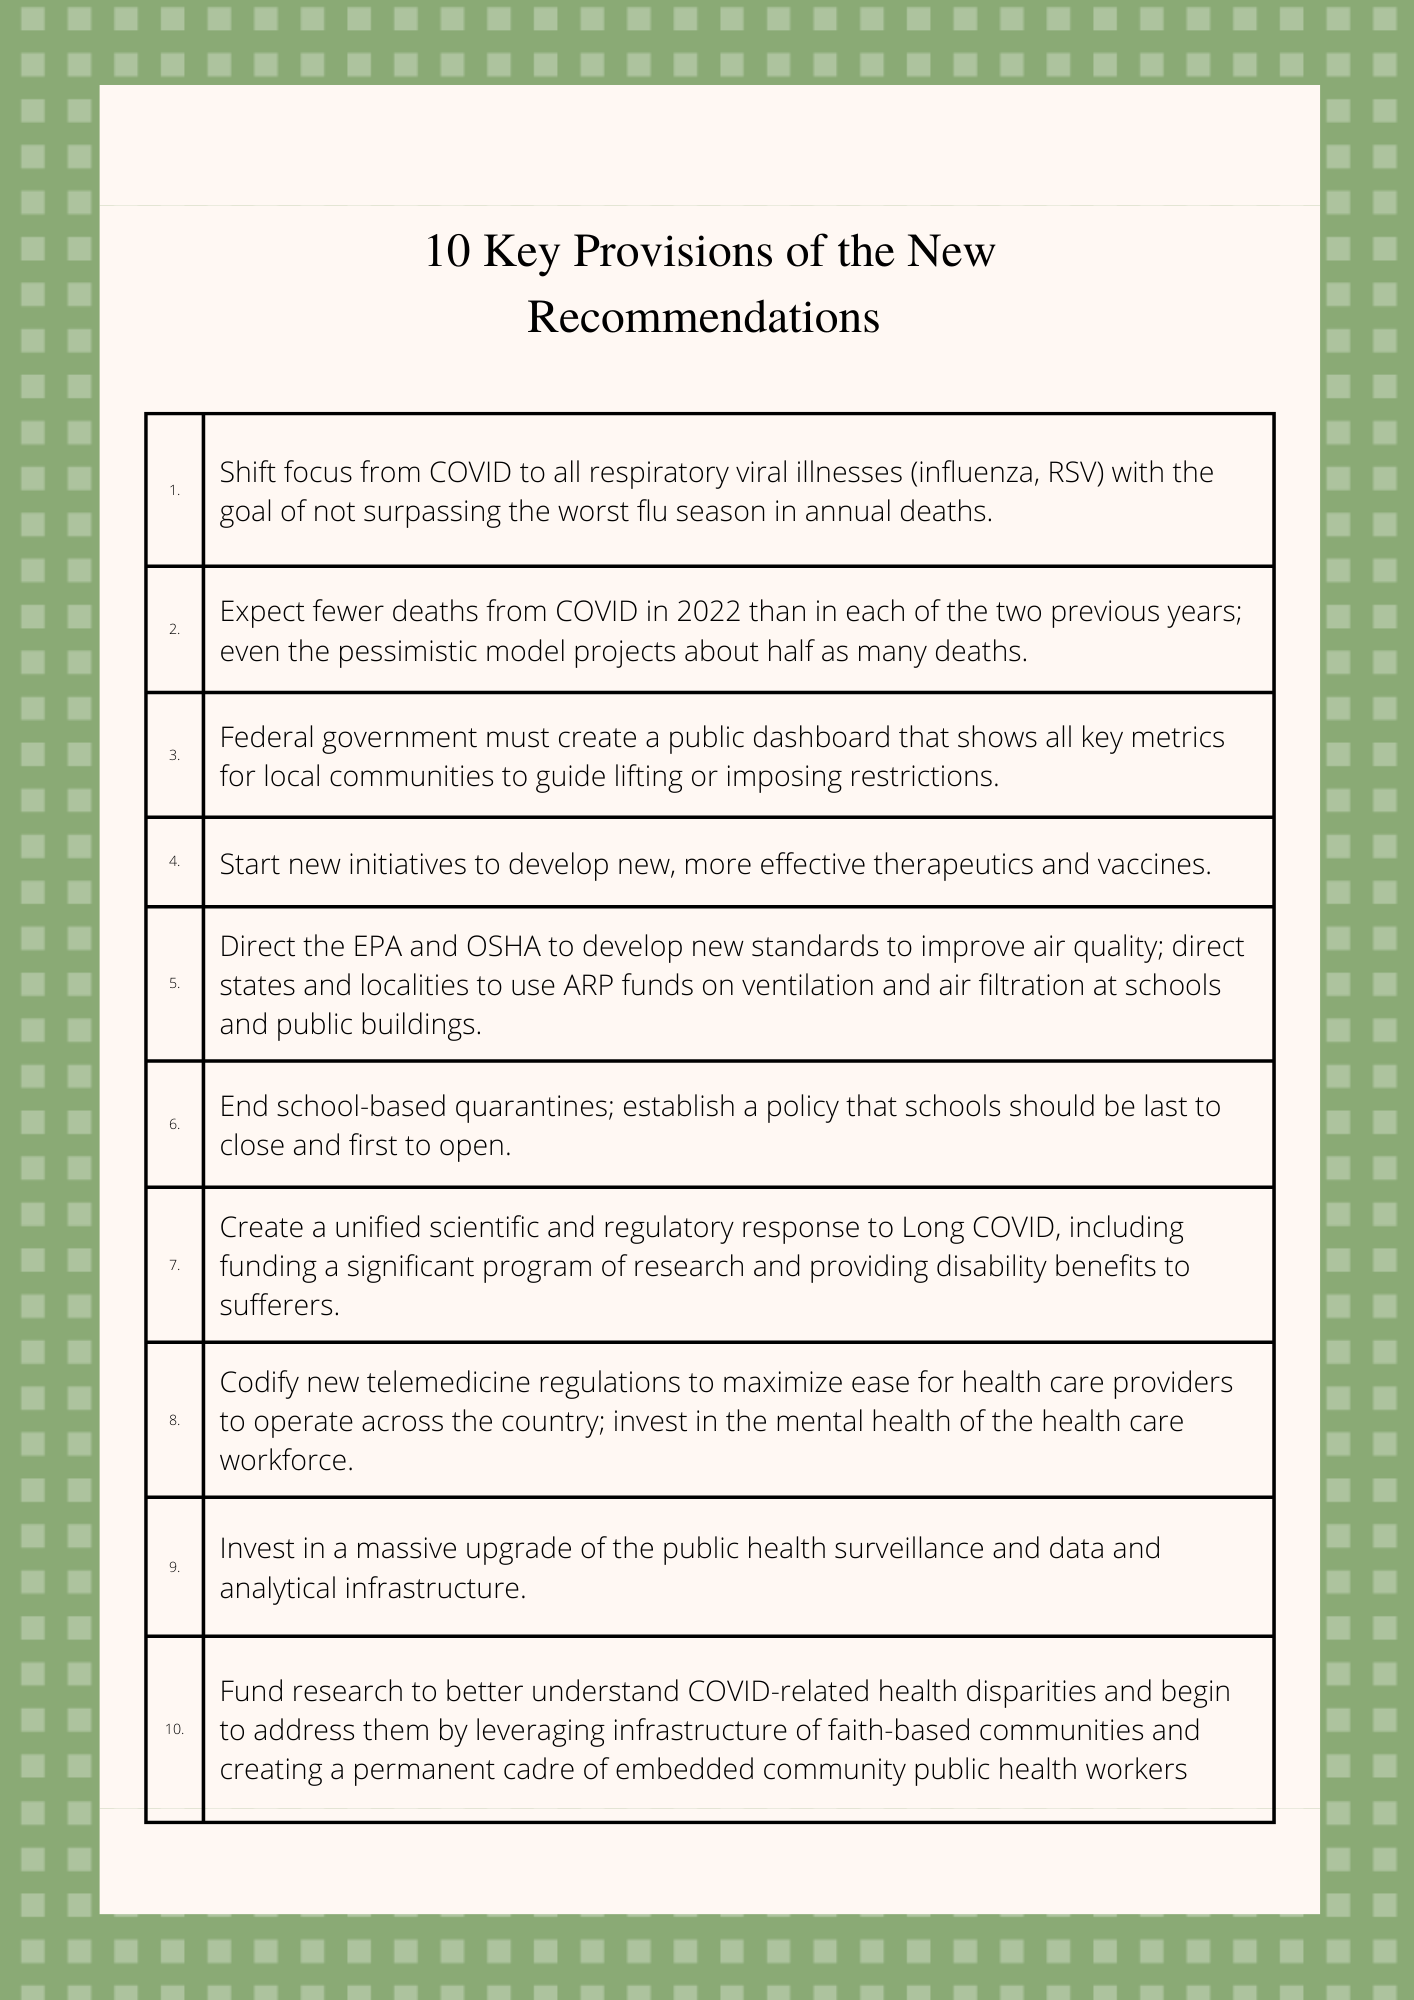 10 Key Provisions of the New Recommendations